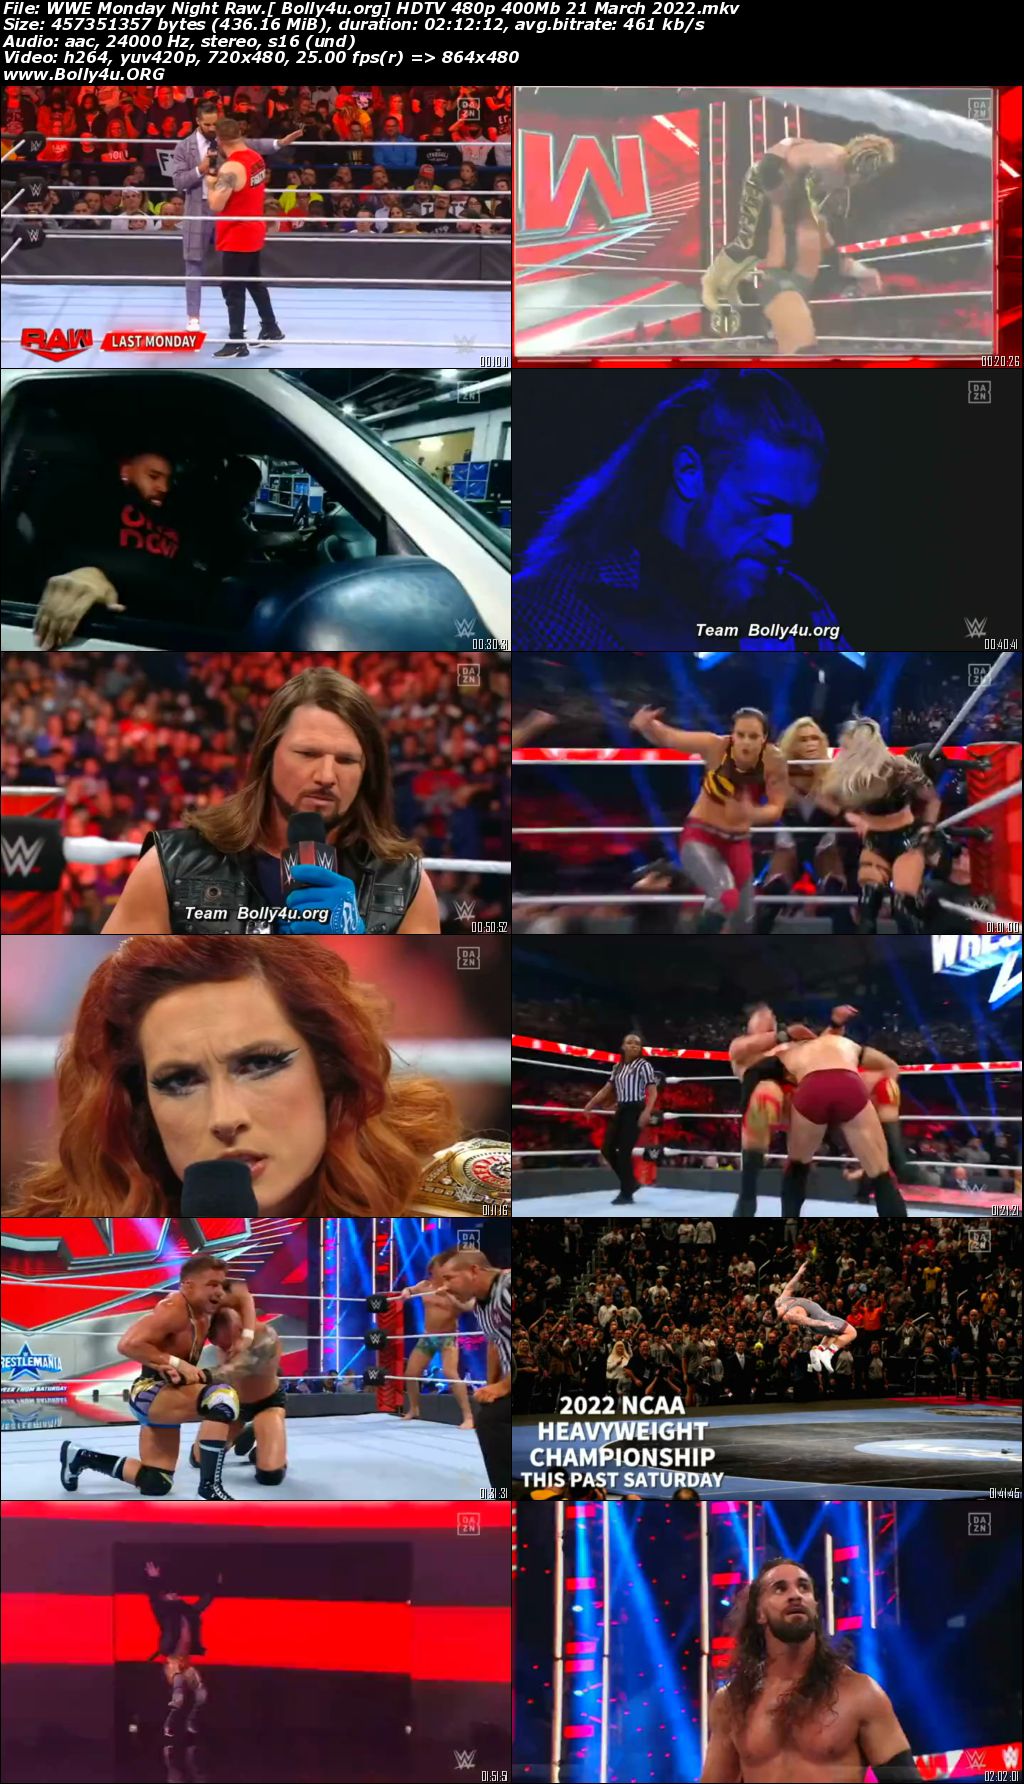 WWE Monday Night Raw HDTV 480p 400Mb 21 March 2022 Download